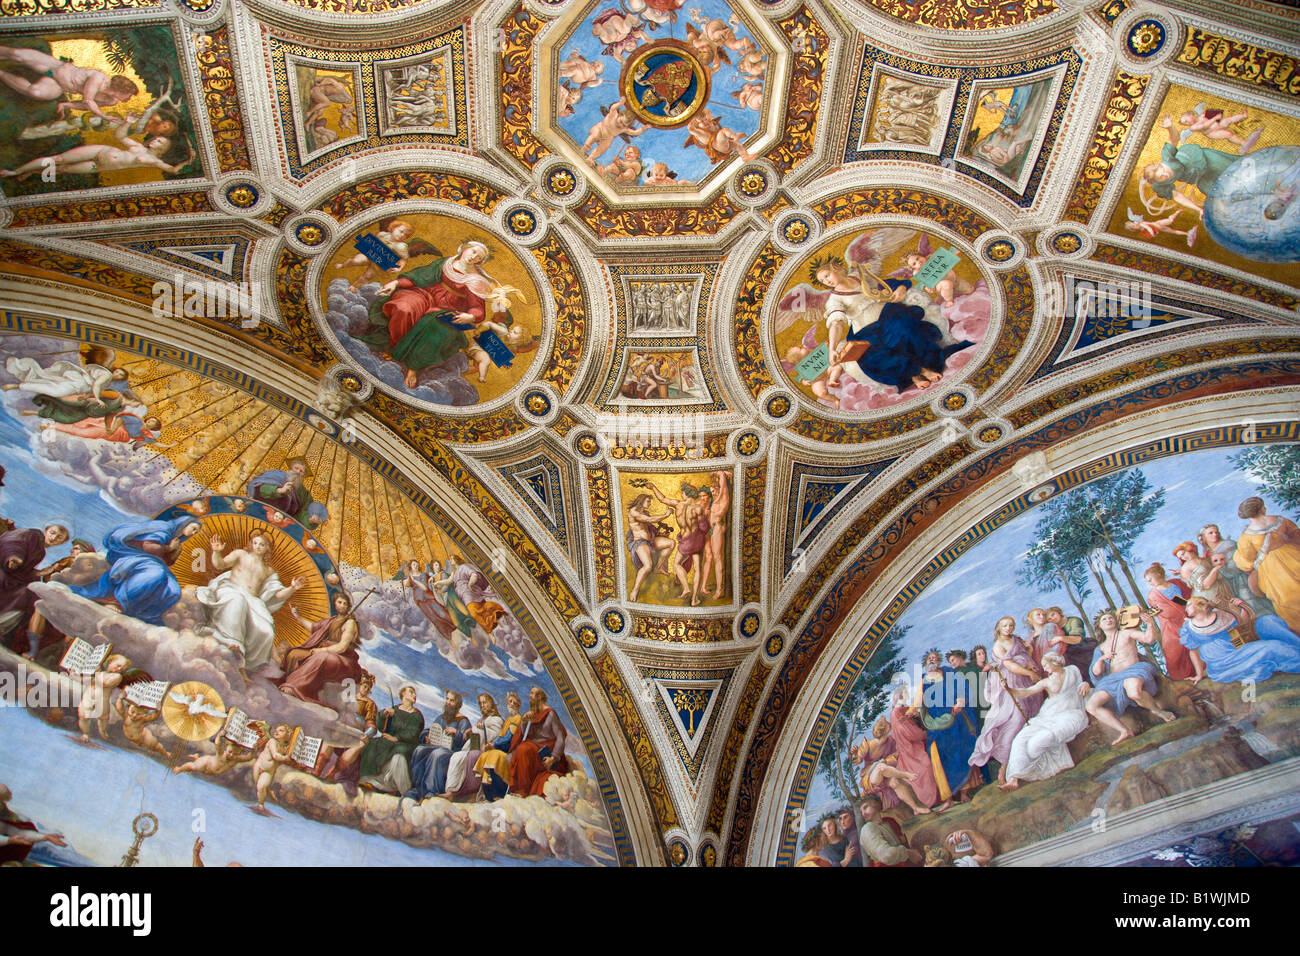 ITALY Lazio Rome Vatican City Museums Raphael Room of Signatura with Disputation of Holy Sacrament and The Parnassus Stock Photo